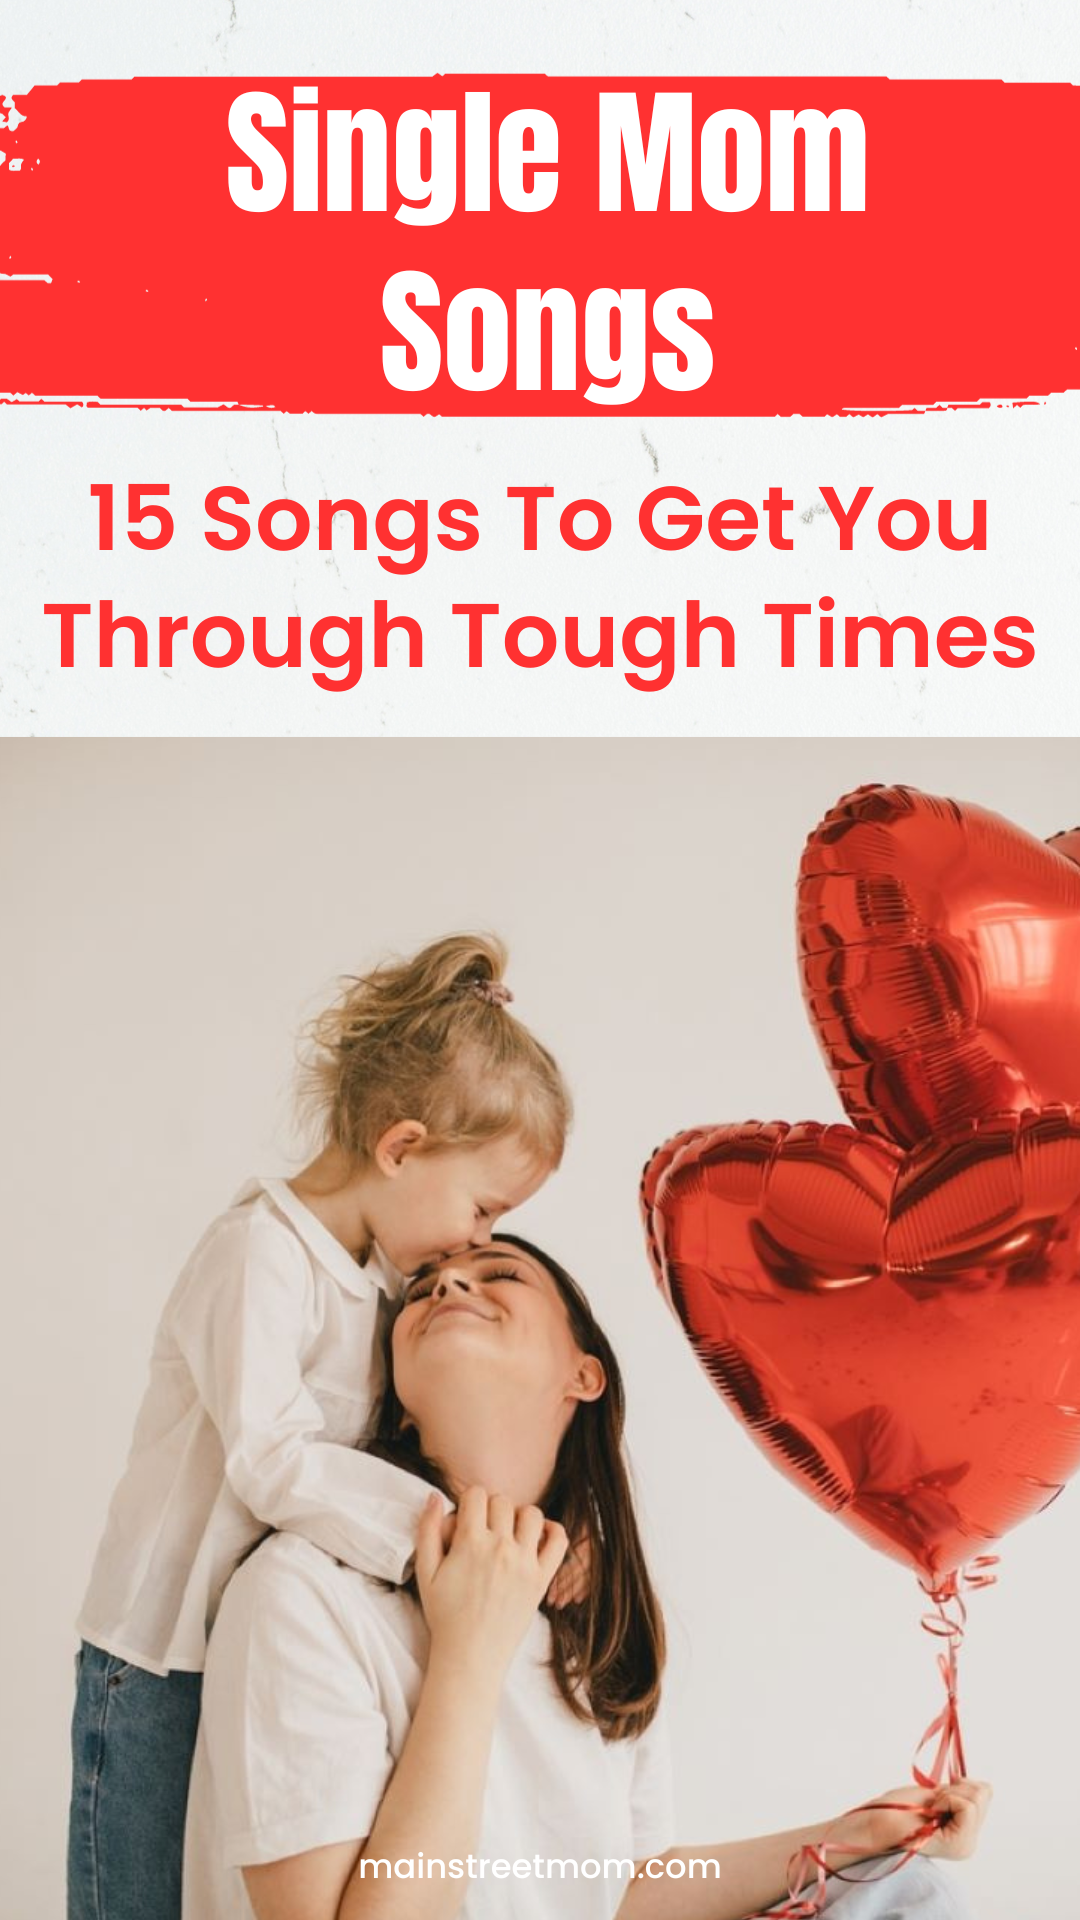 Single Mom Songs: 15 Songs To Get You Through Tough Times